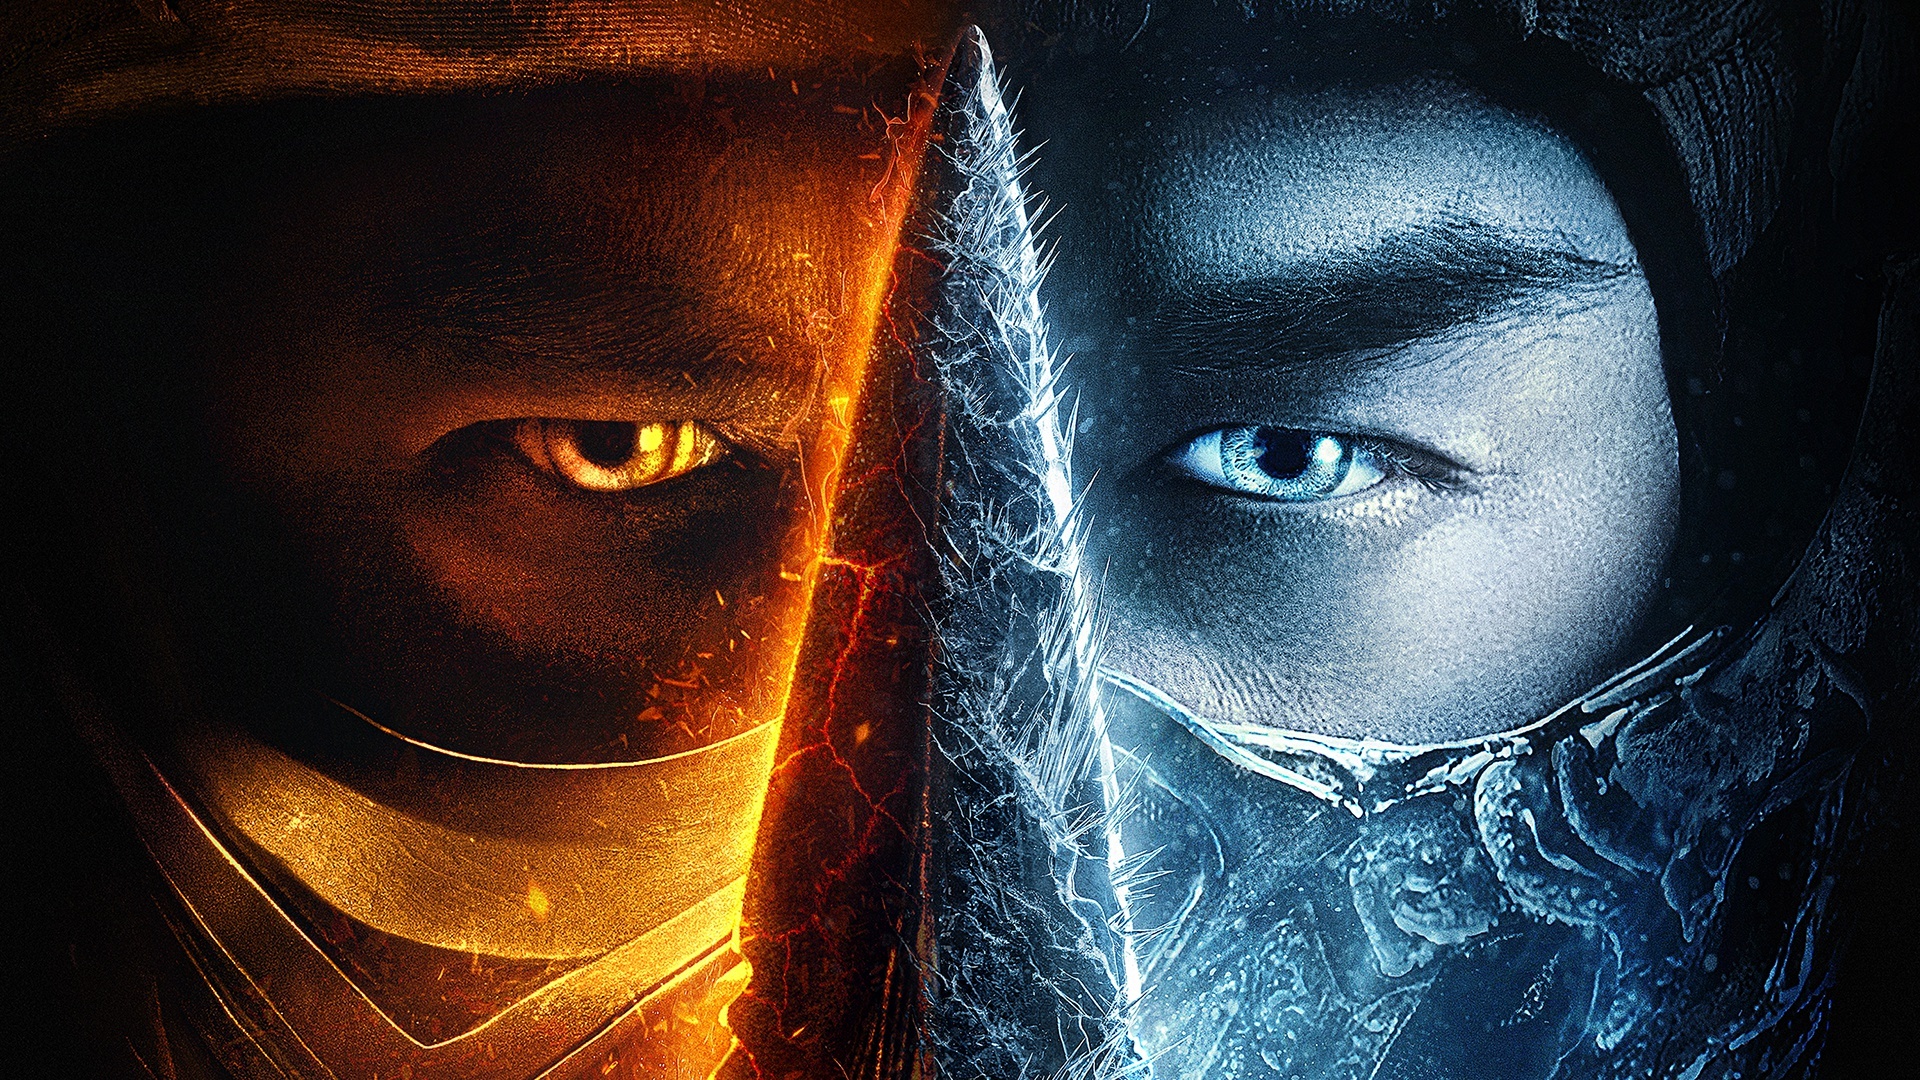 How to watch Mortal Kombat online, Streaming guide, Where to stream movie, Techradar recommendation, 1920x1080 Full HD Desktop